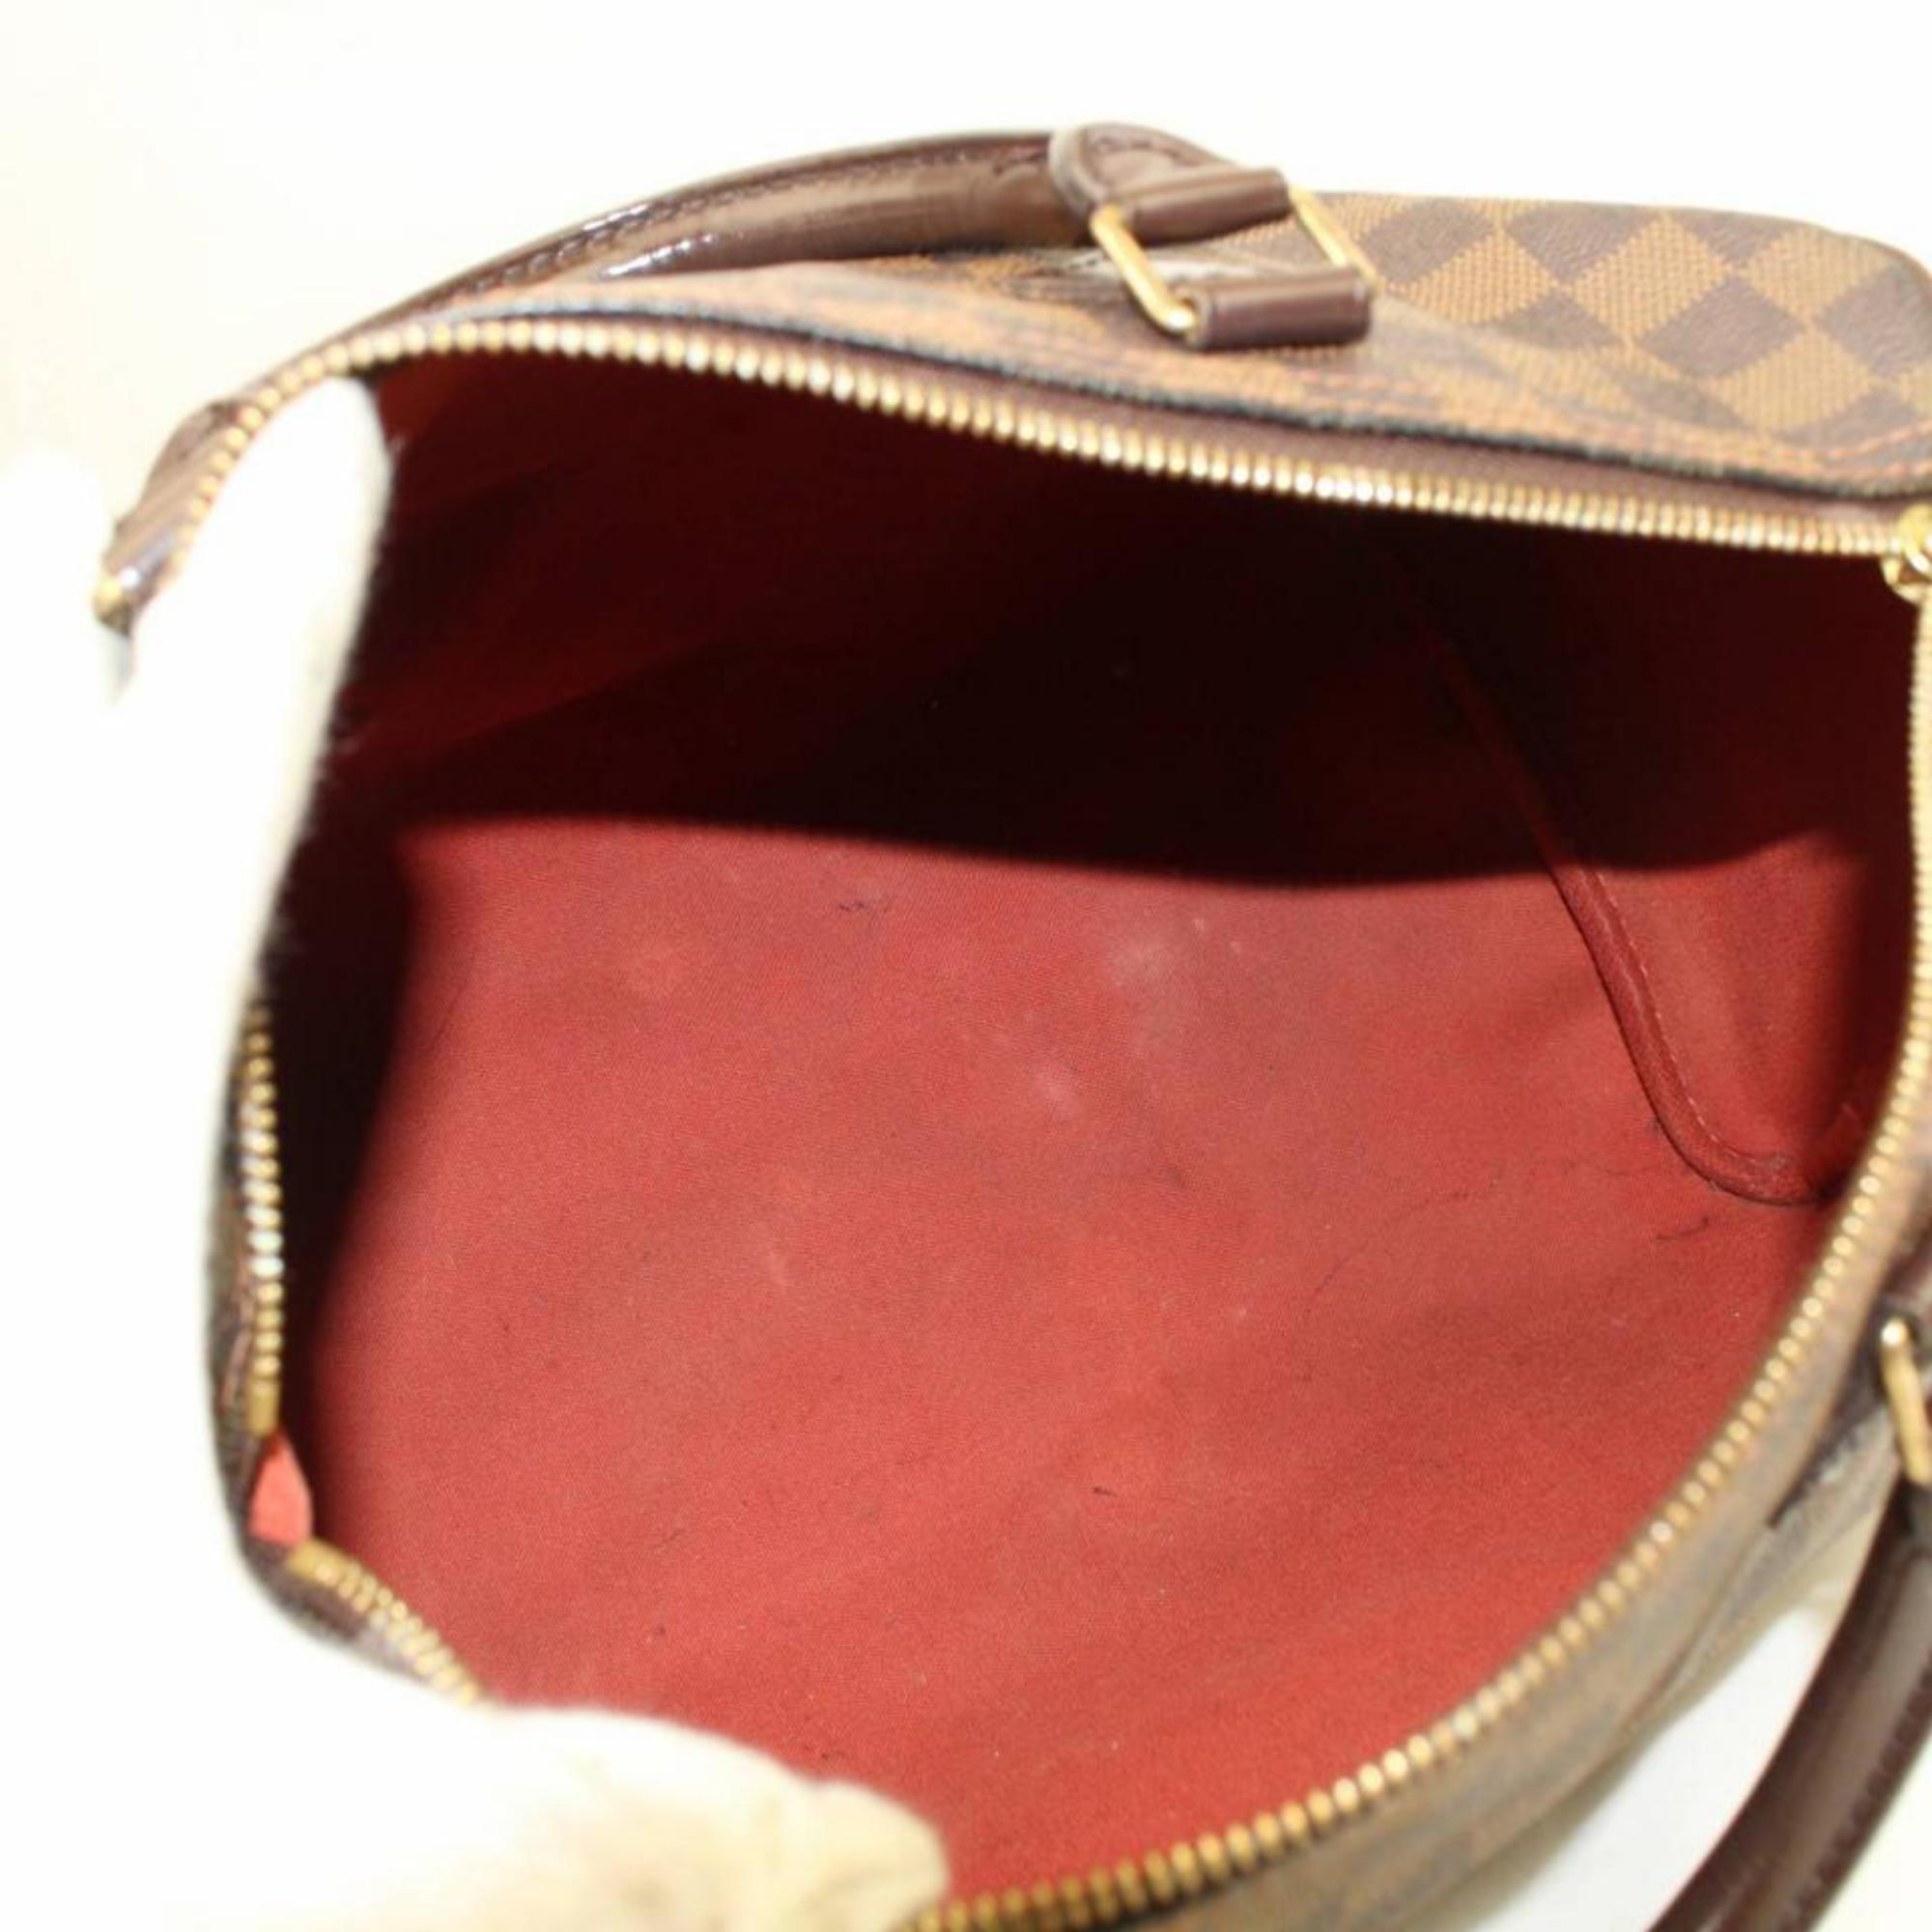 Louis Vuitton Speedy Damier Ebene 30 868448 Brown Coated Canvas Satchel In Good Condition For Sale In Forest Hills, NY